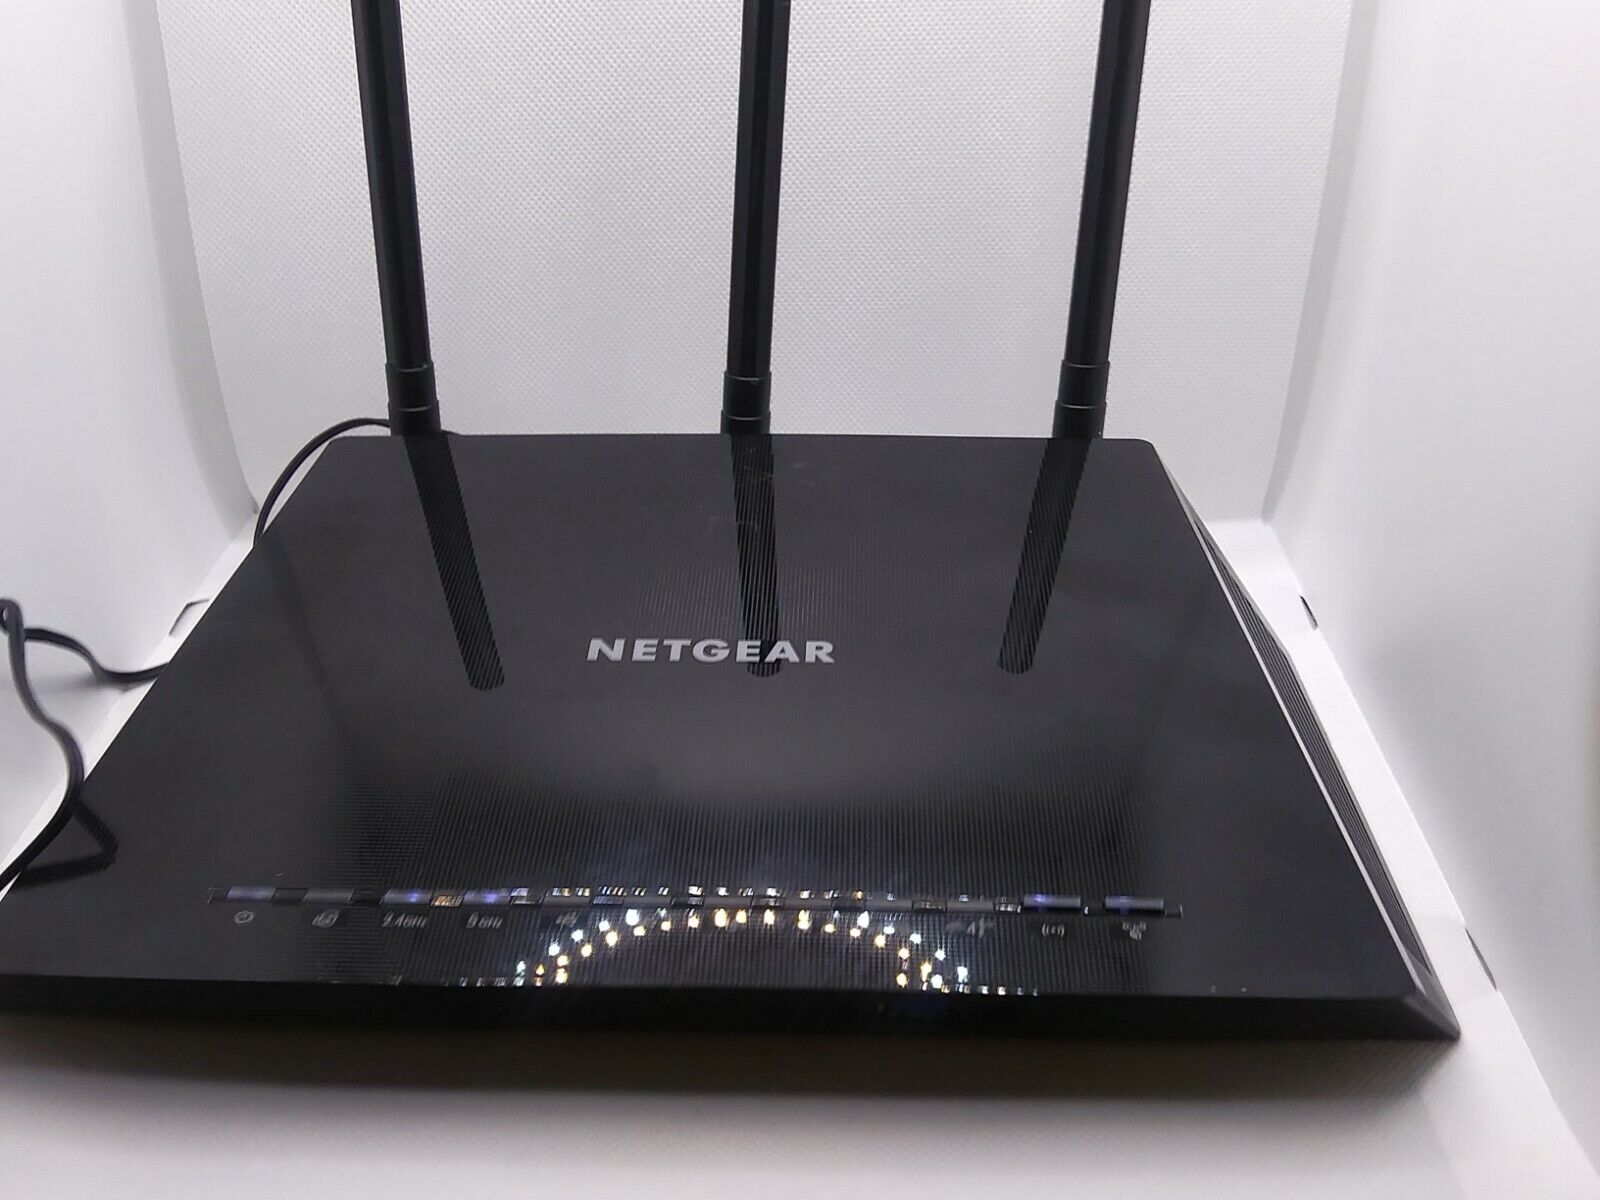 🔥 NETGEAR R6400 v2 Smart WiFi Router AC1750 (Tested, Works Great w/ Power Cord)